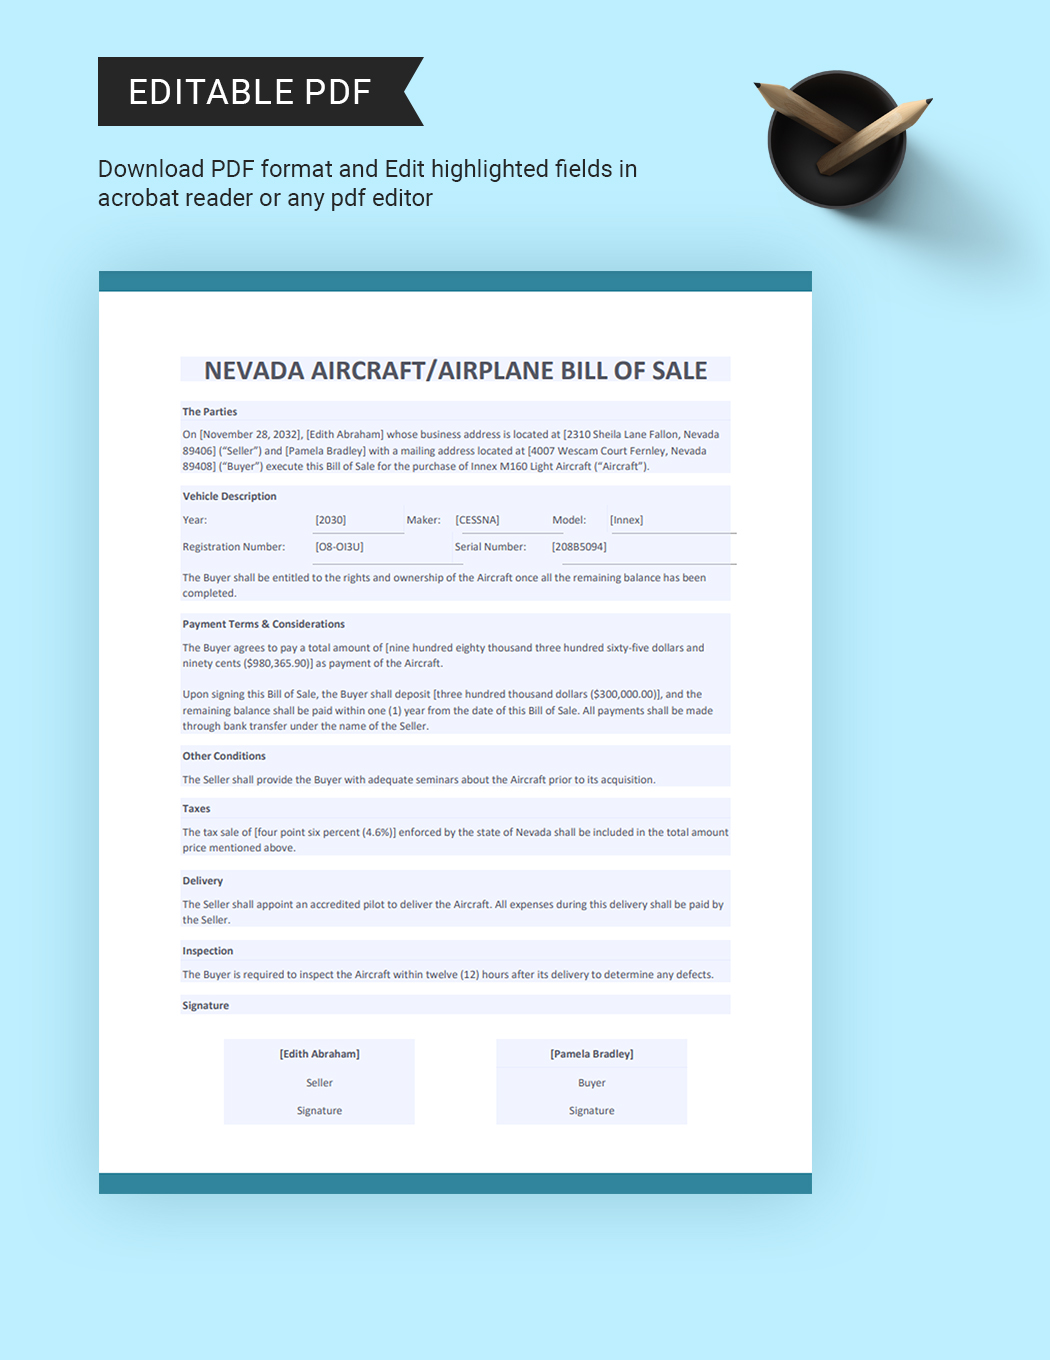 Nevada Aircraft/Airplane Bill of Sale Template